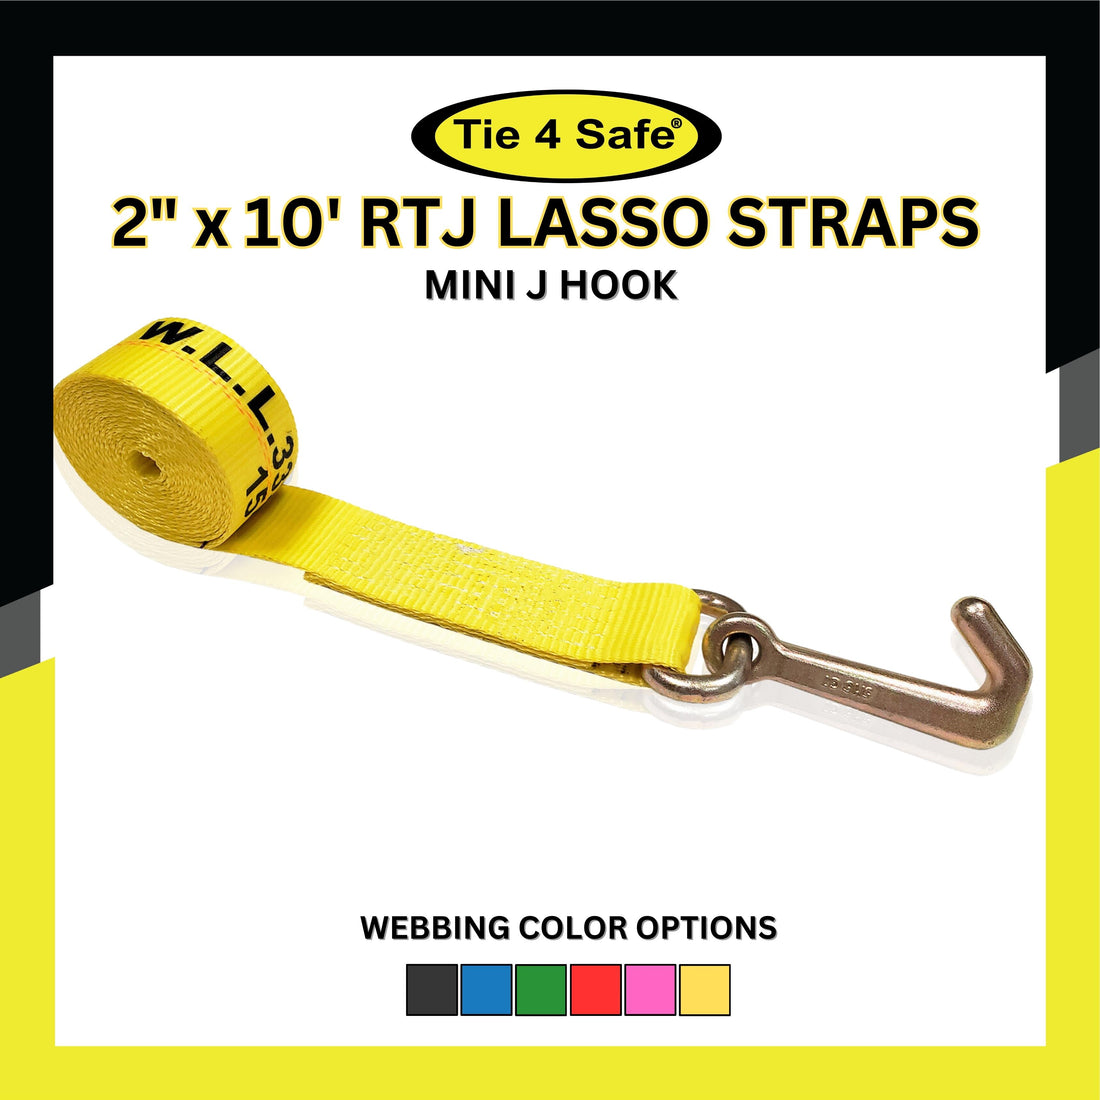 Towing Straps – Tie 4 Safe